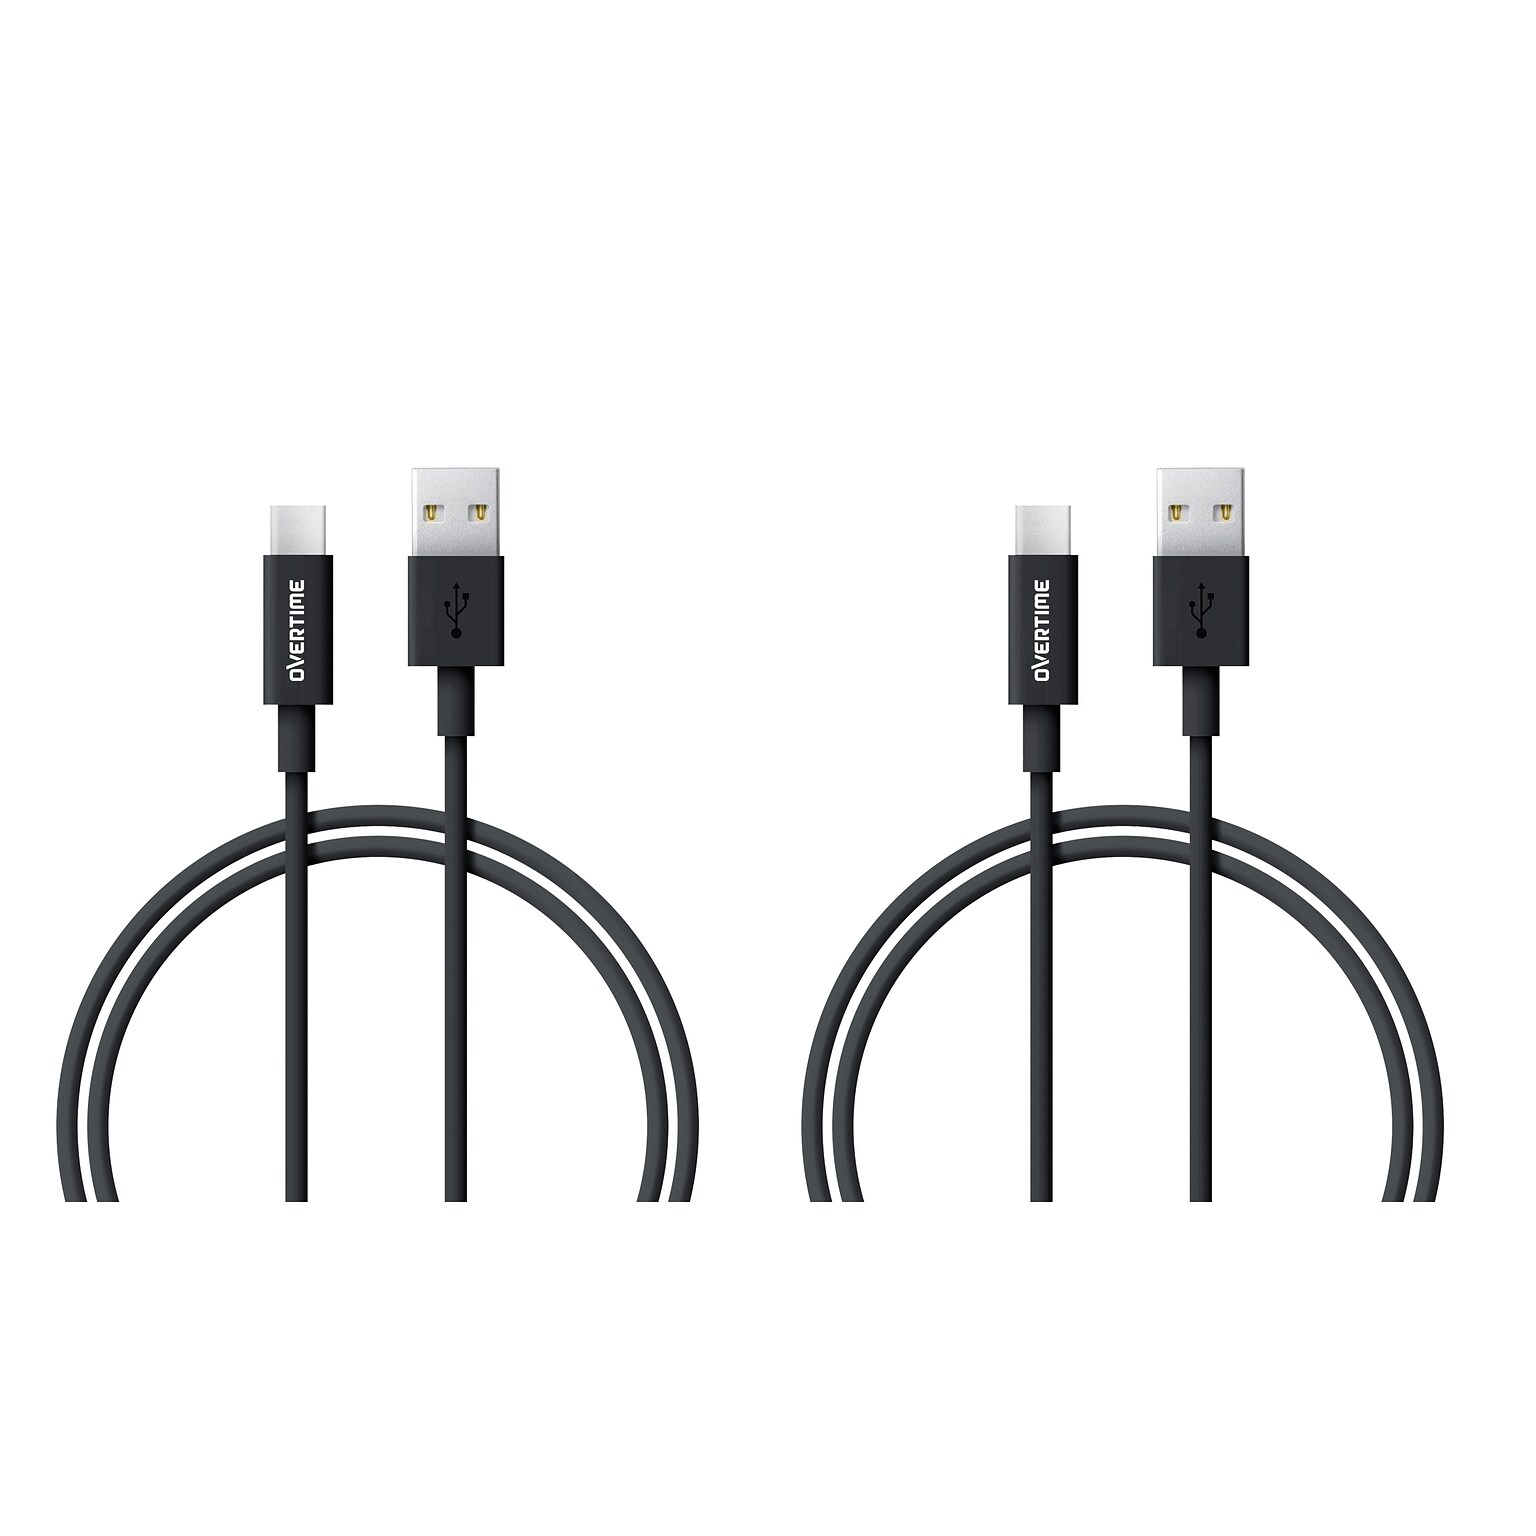 USB Type C Charging  Cable 6ft  - Rapid Charge for OnePlus 5, Galaxy S8, Nexus 5X, HTC 10, Chromebook Pixel - 2 Pack